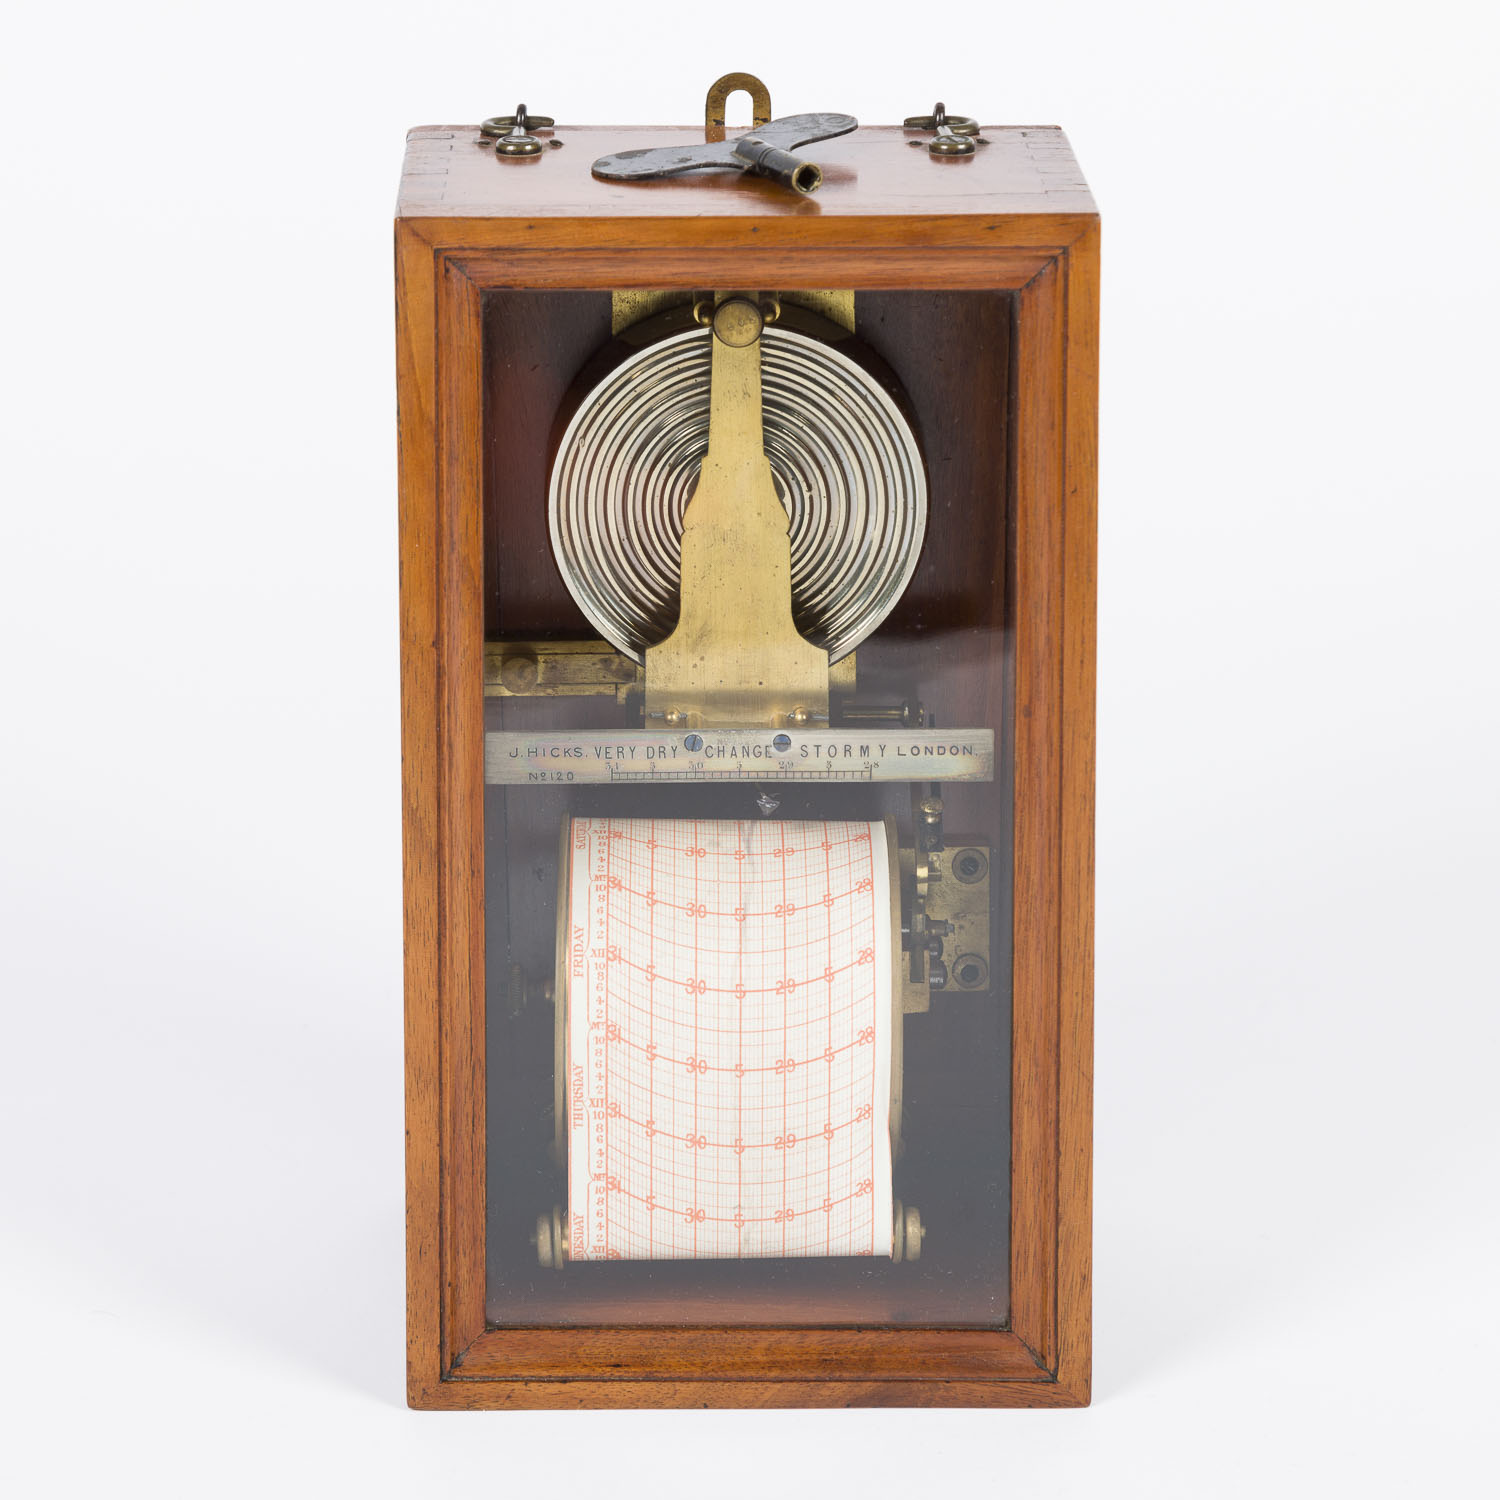 Antoine Redier patent wall mounted barograph